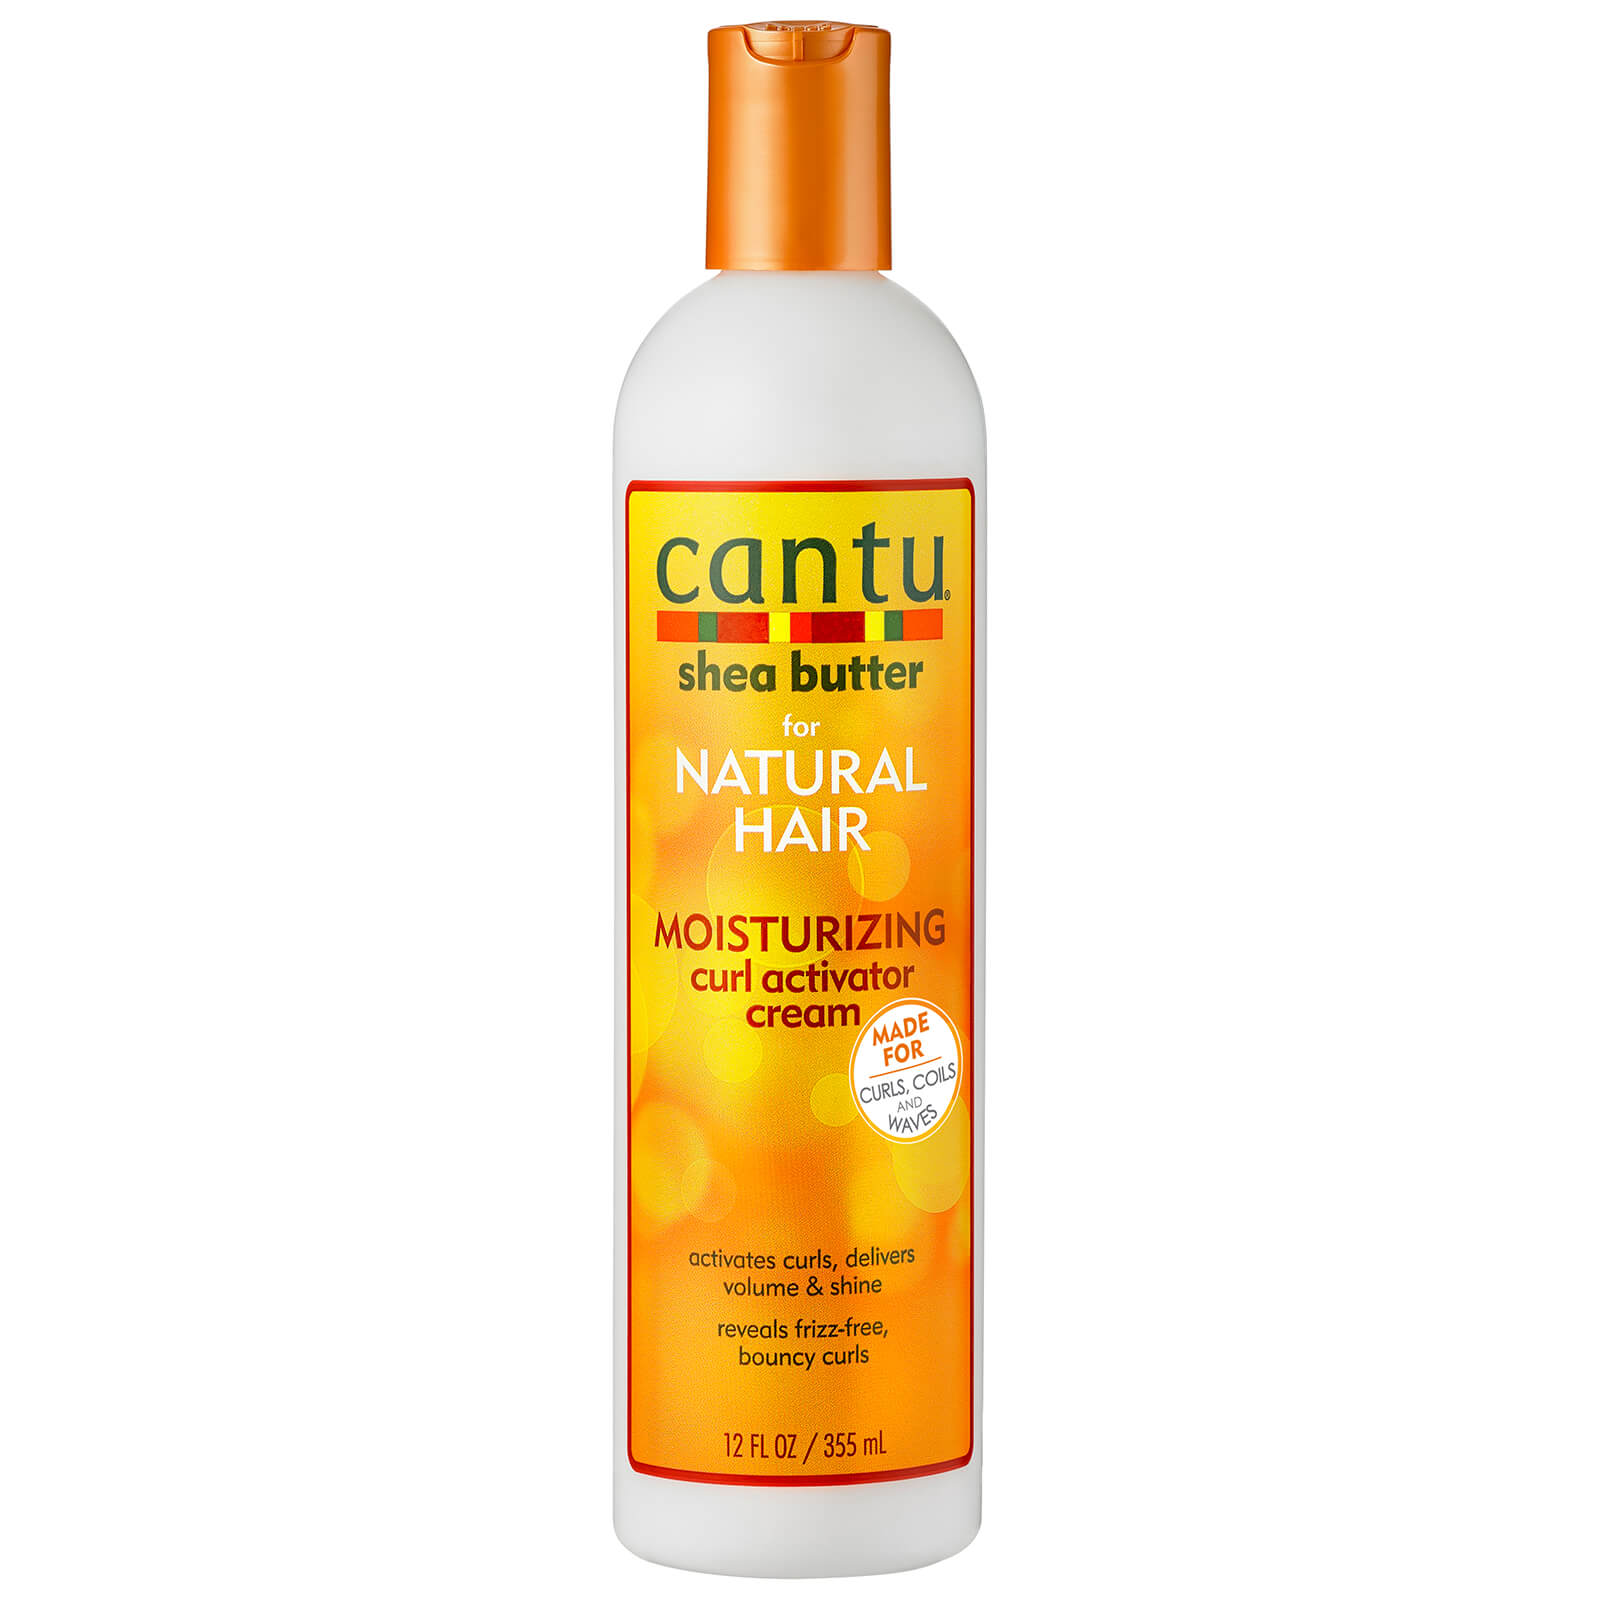 Cantu Curl Activator, a low-protein product